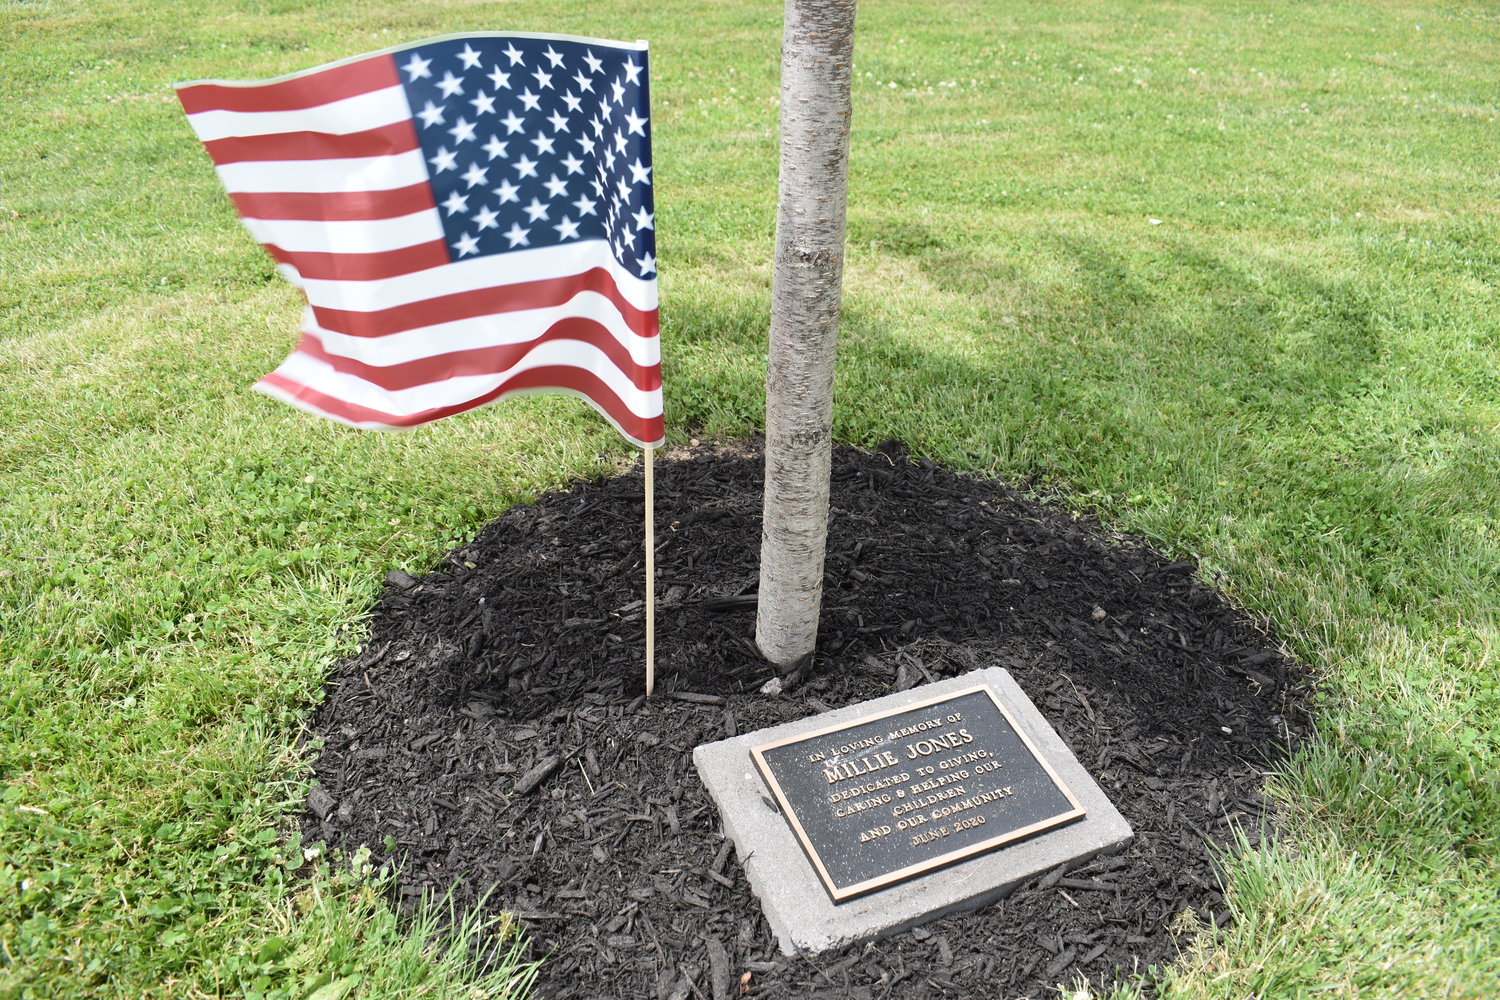 Four new trees were added by East Meadow Kiwanis in honor of those who died.